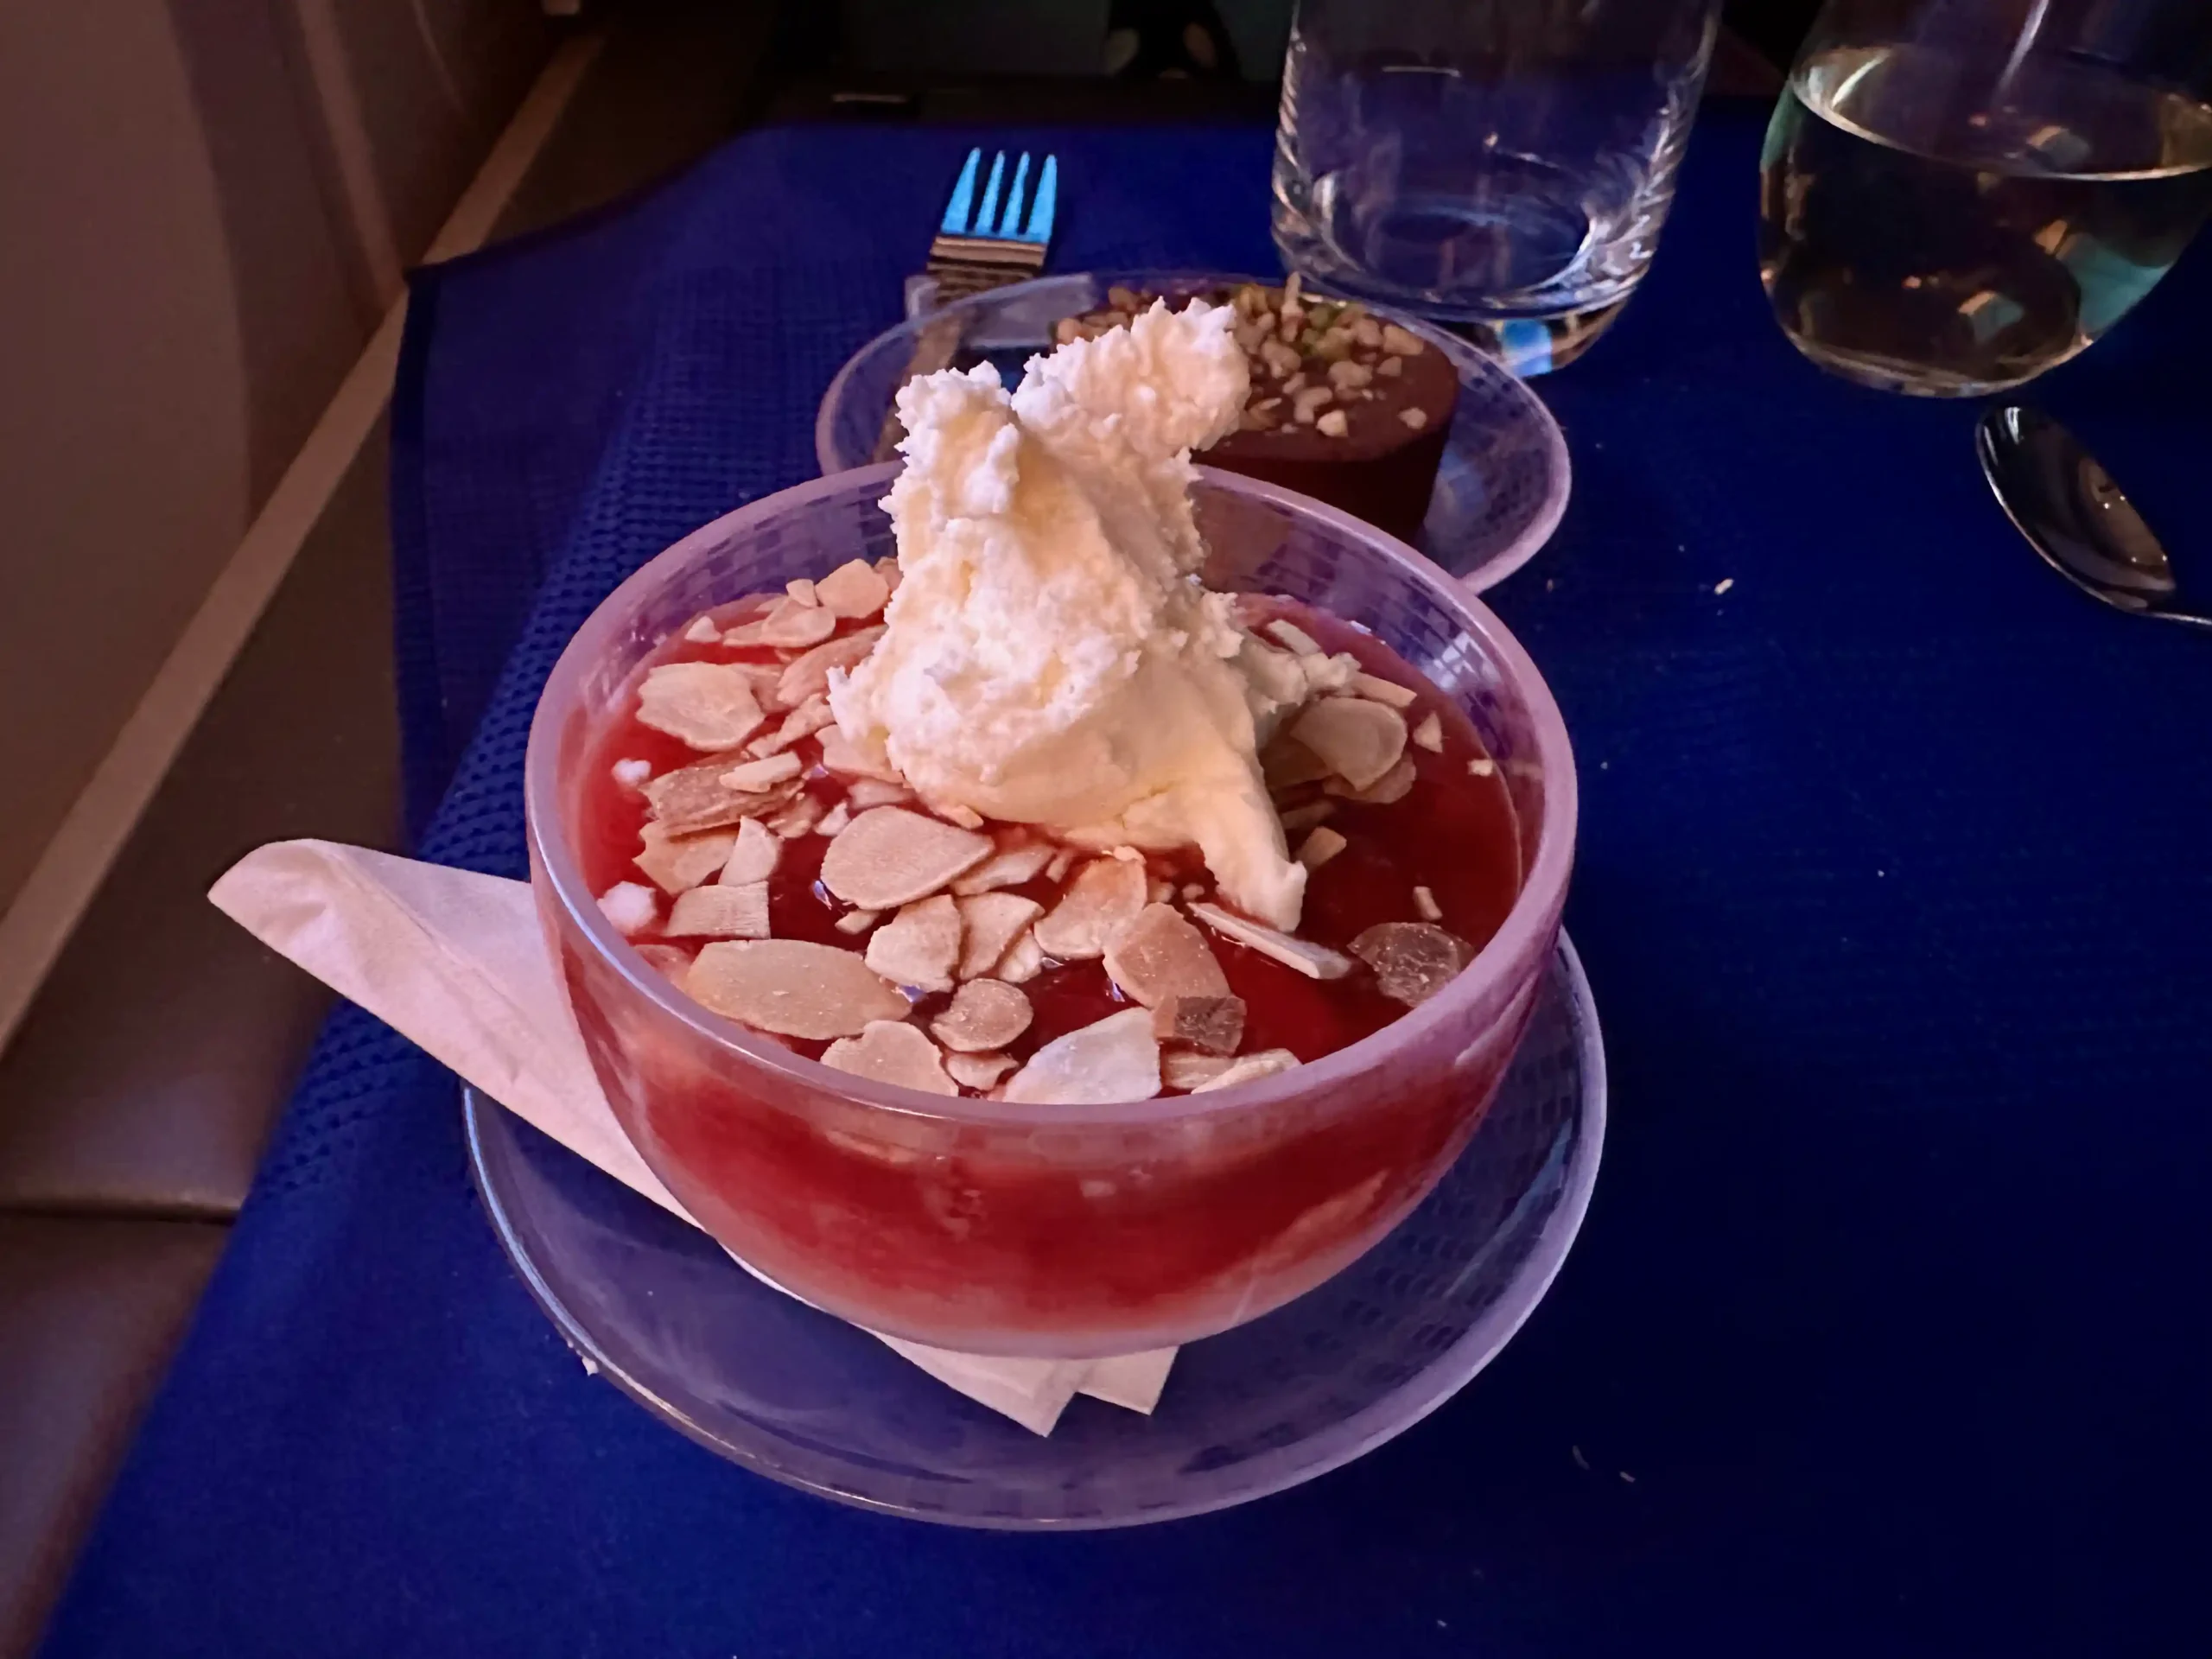 a bowl of dessert with a scoop of ice cream on top